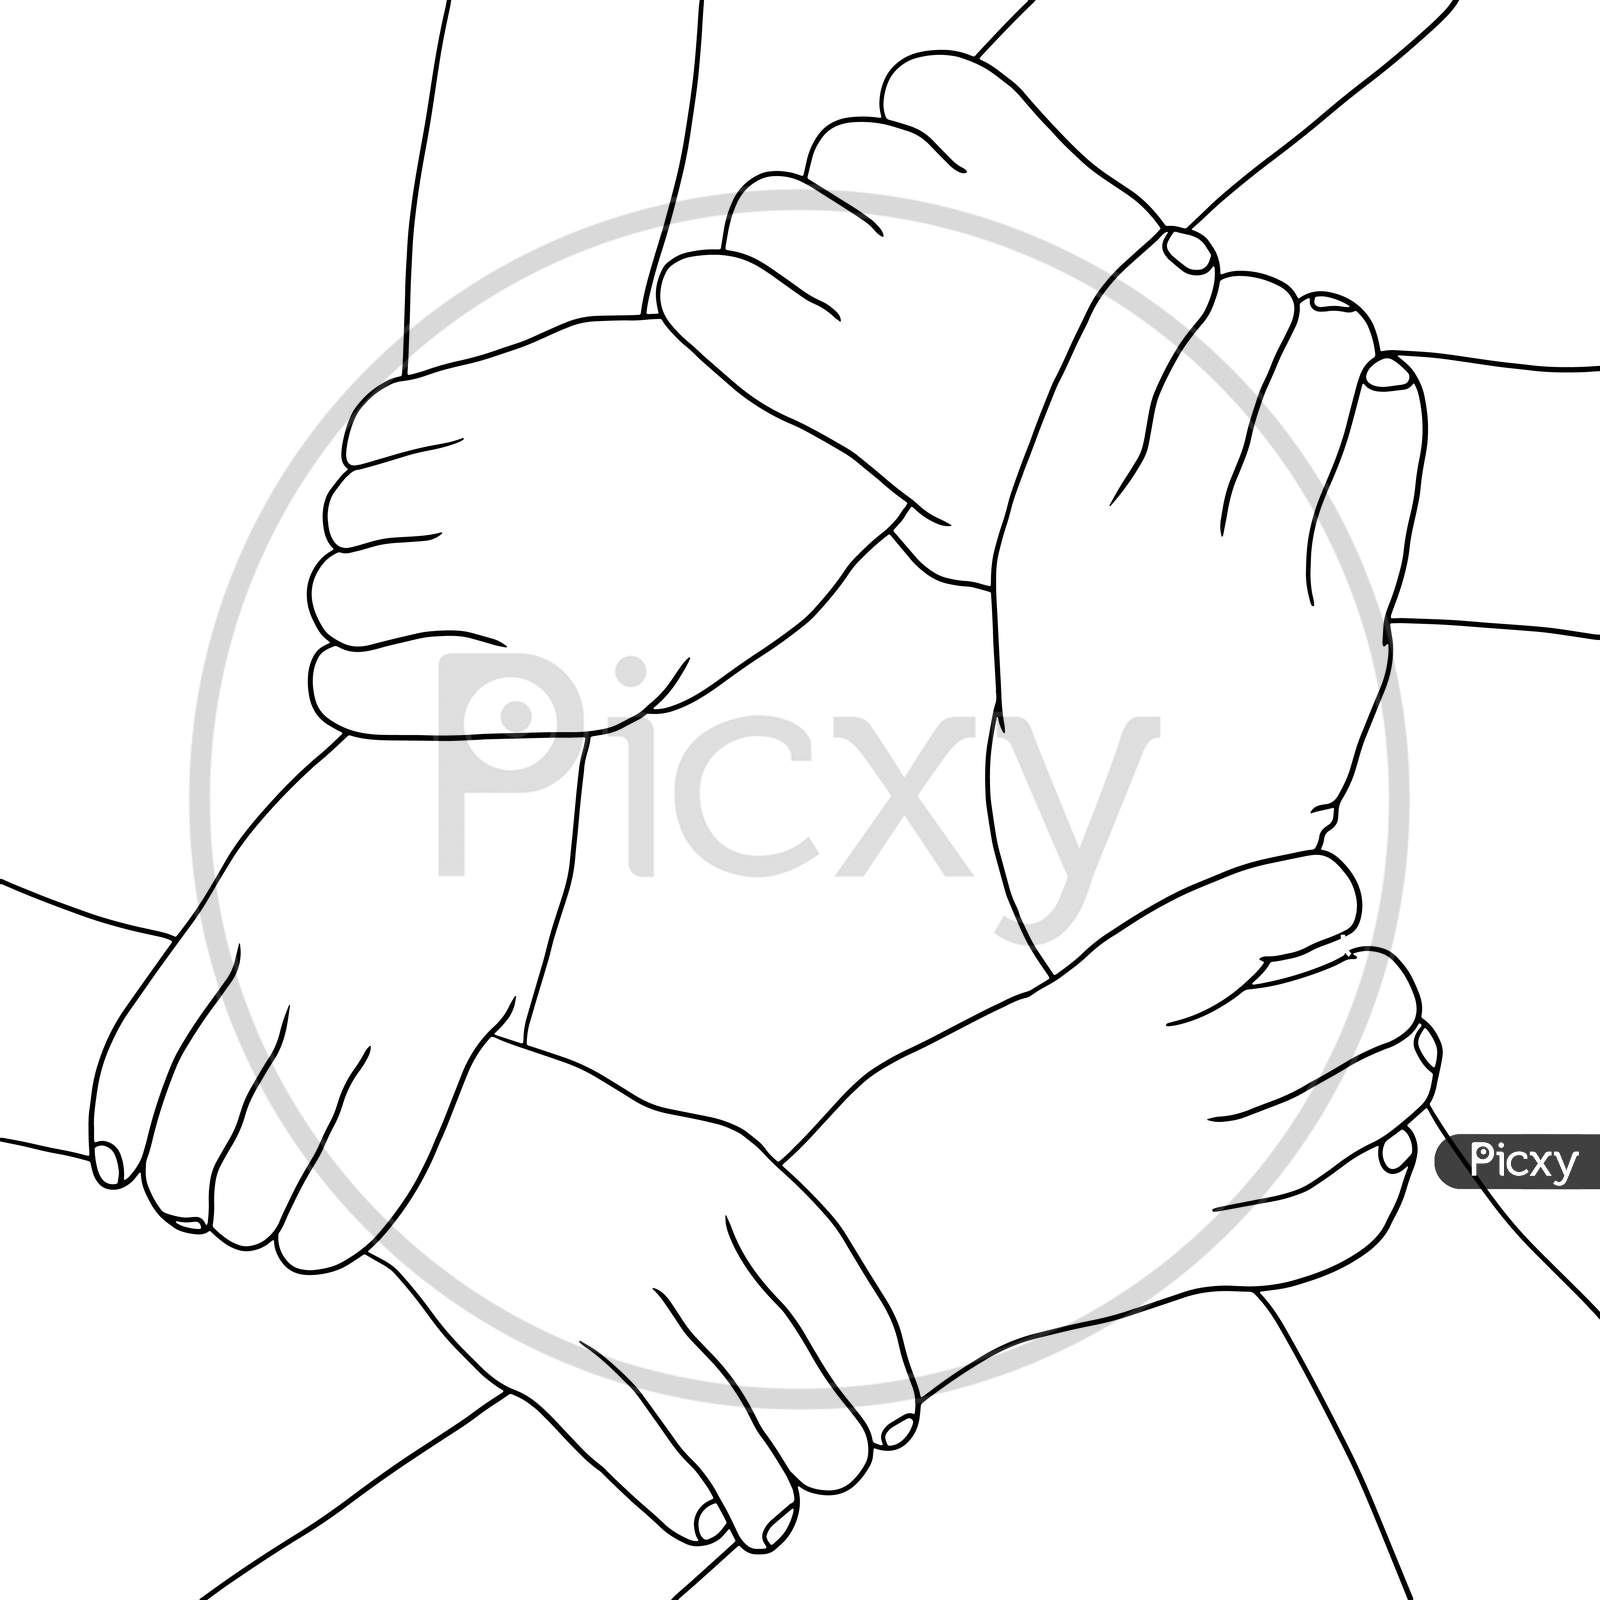 Image of coloring pages